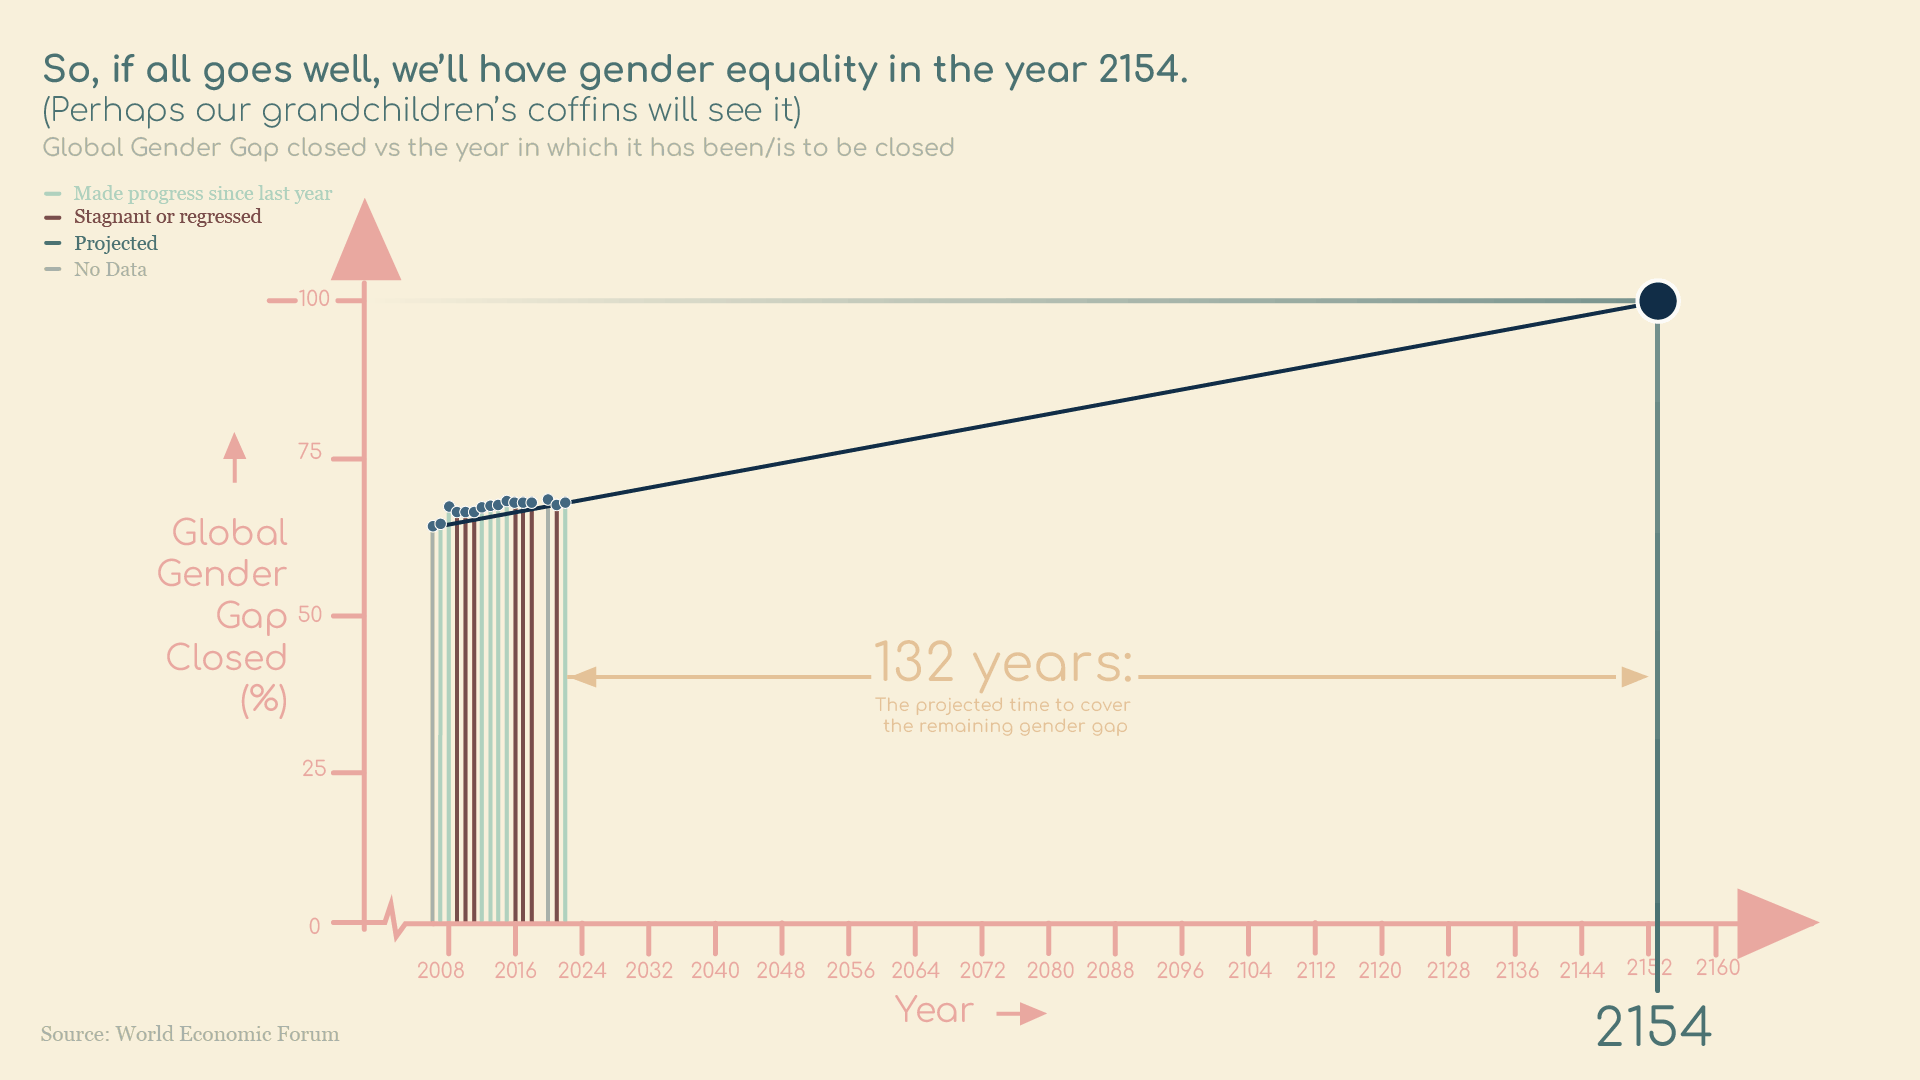 So, if it all goes well, we'll have gender equality in the year 2154. (Perhaps our grandchildren's coffins will see it.